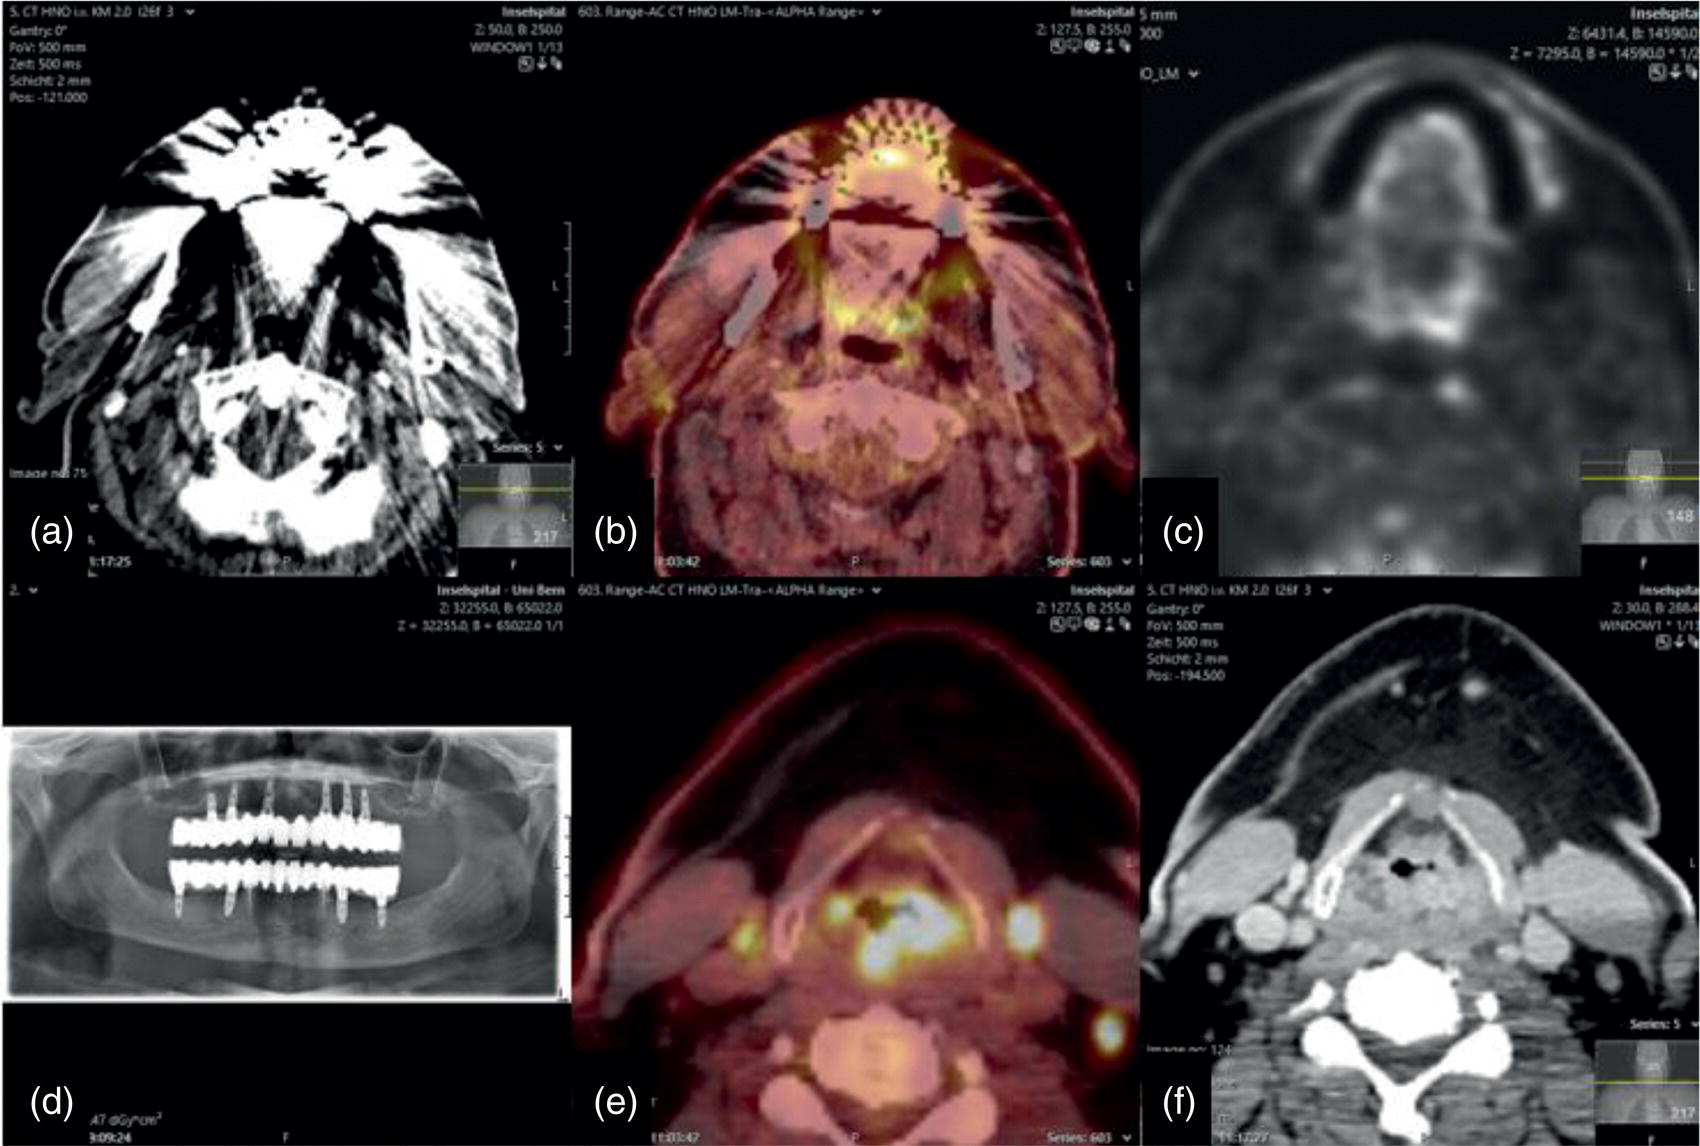 Schematic illustration of dental metal artifacts in PET-CT: tumor evaluation is not affected.